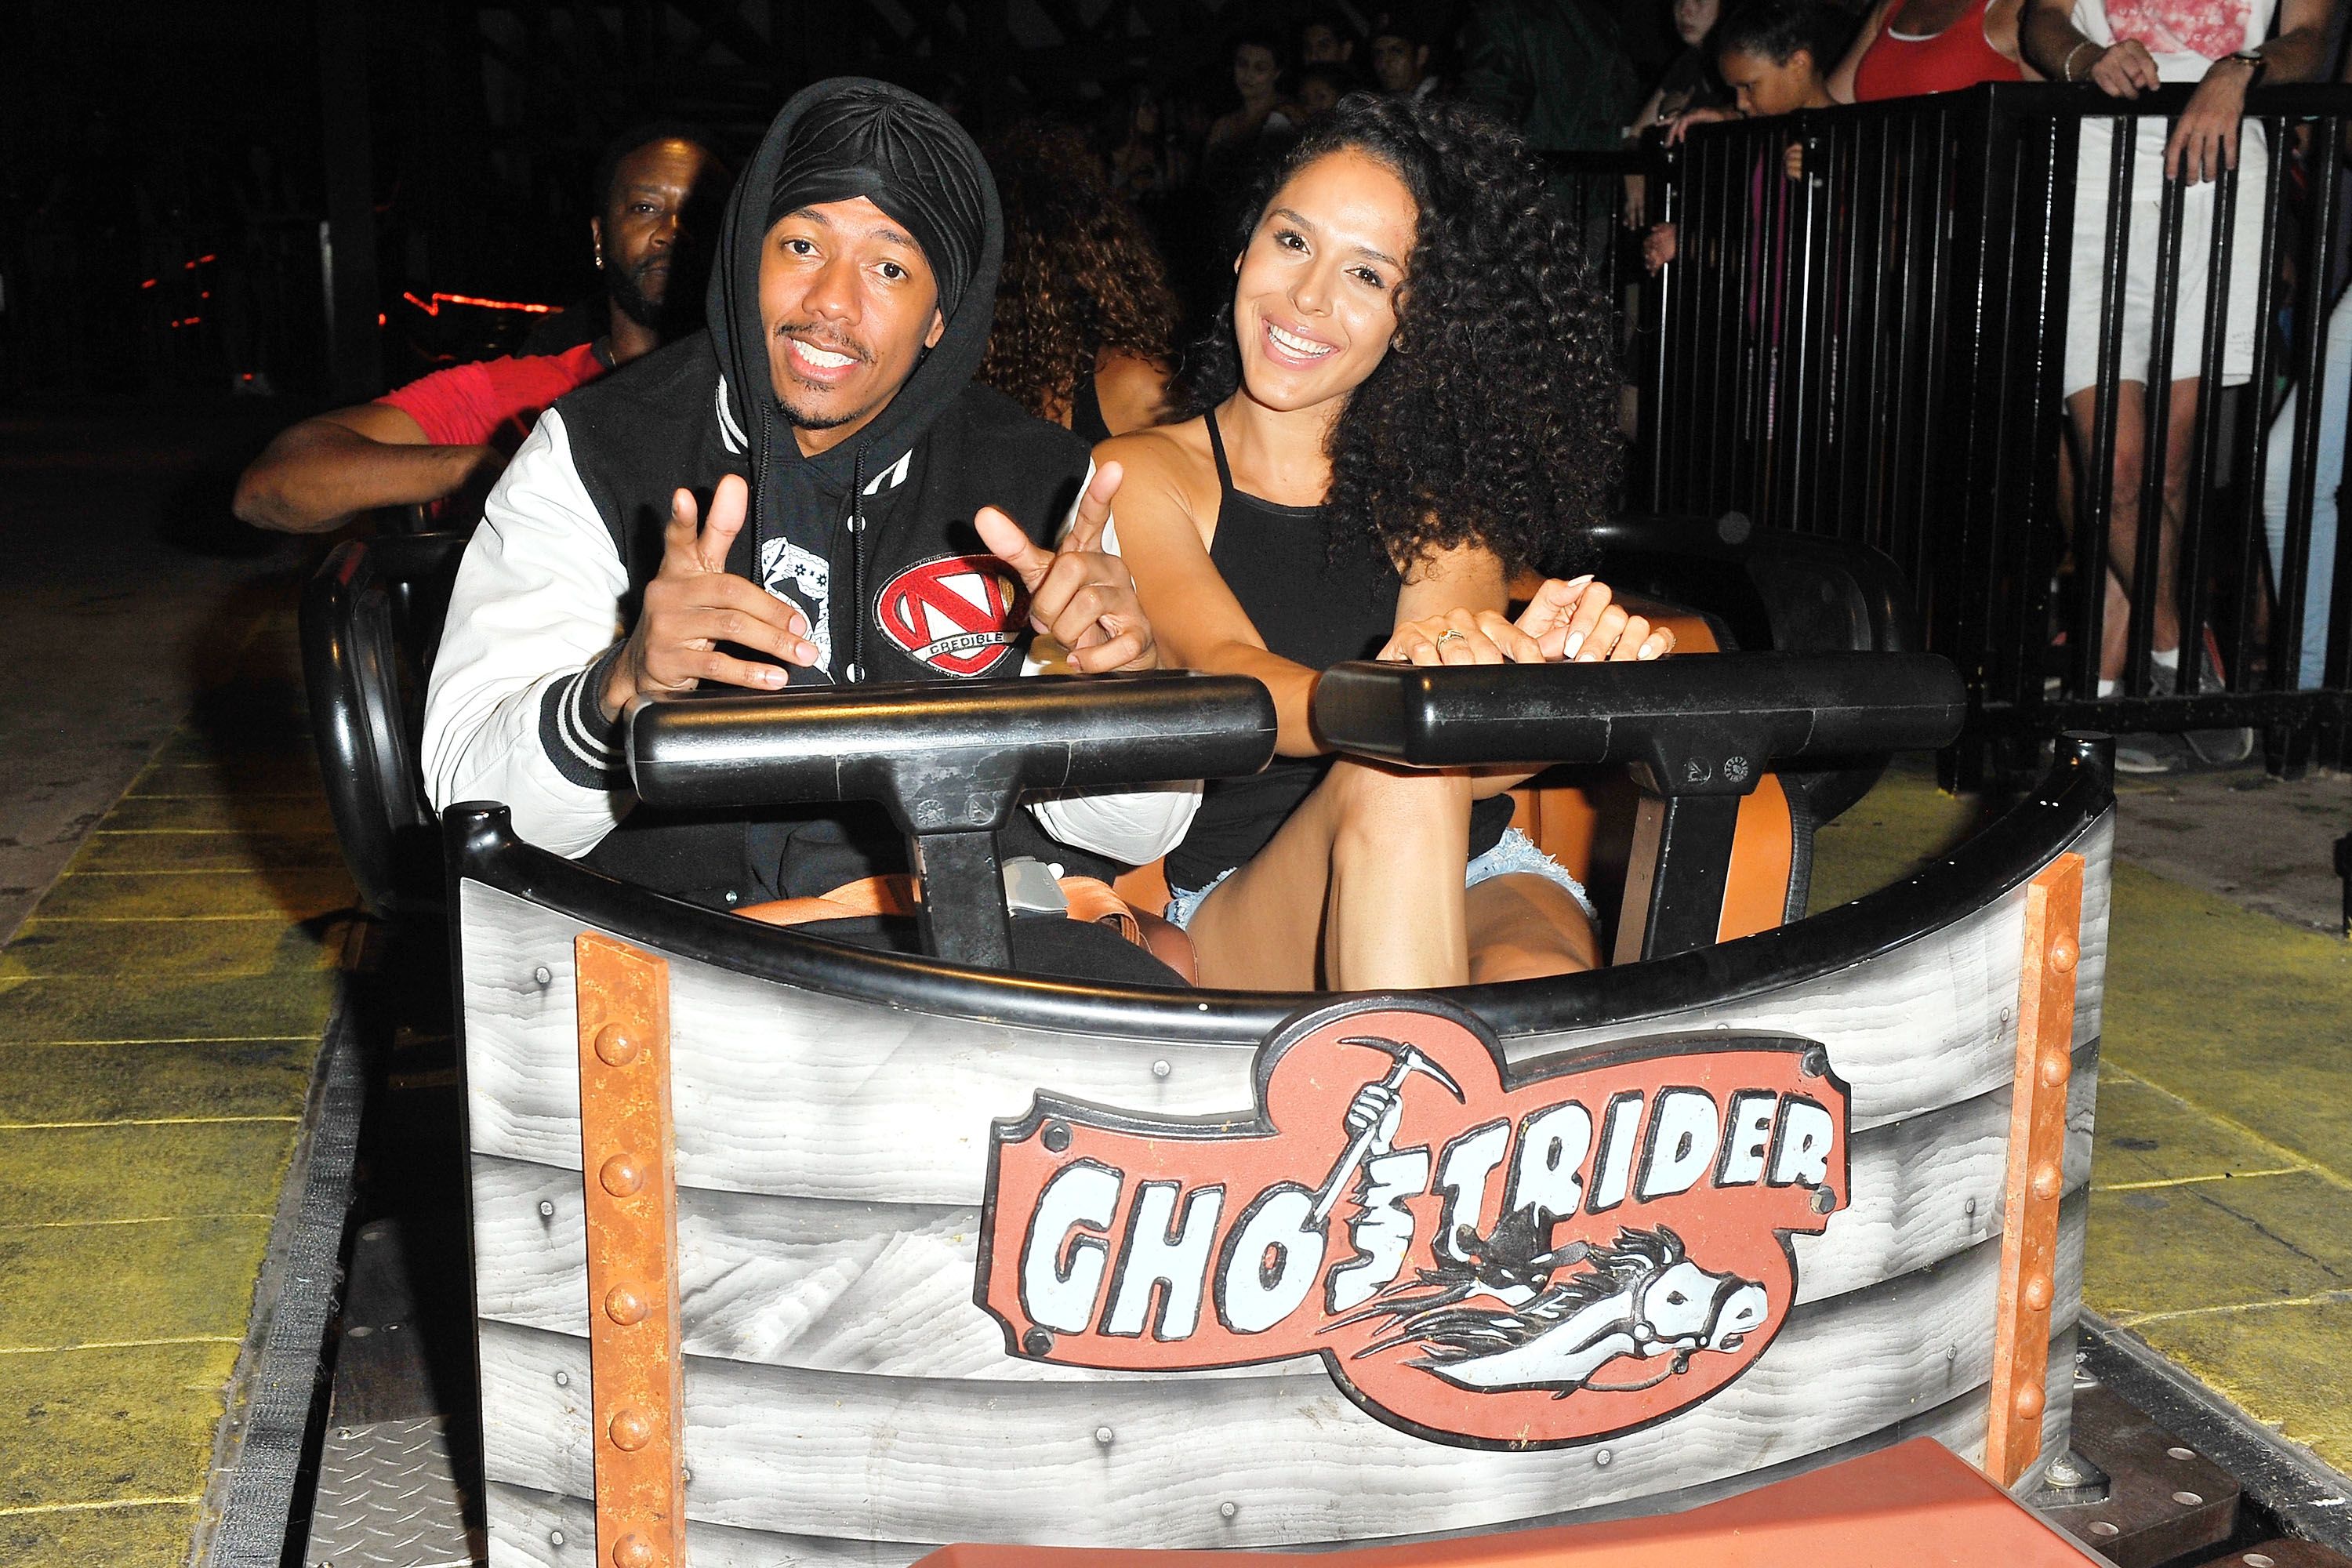 Nick Cannon and Brittany Bell at the "Ghostrider" Roller Coaster at Knott's Berry Farm on September 1, 2017 in Buena Park, California. | Source: Getty Images